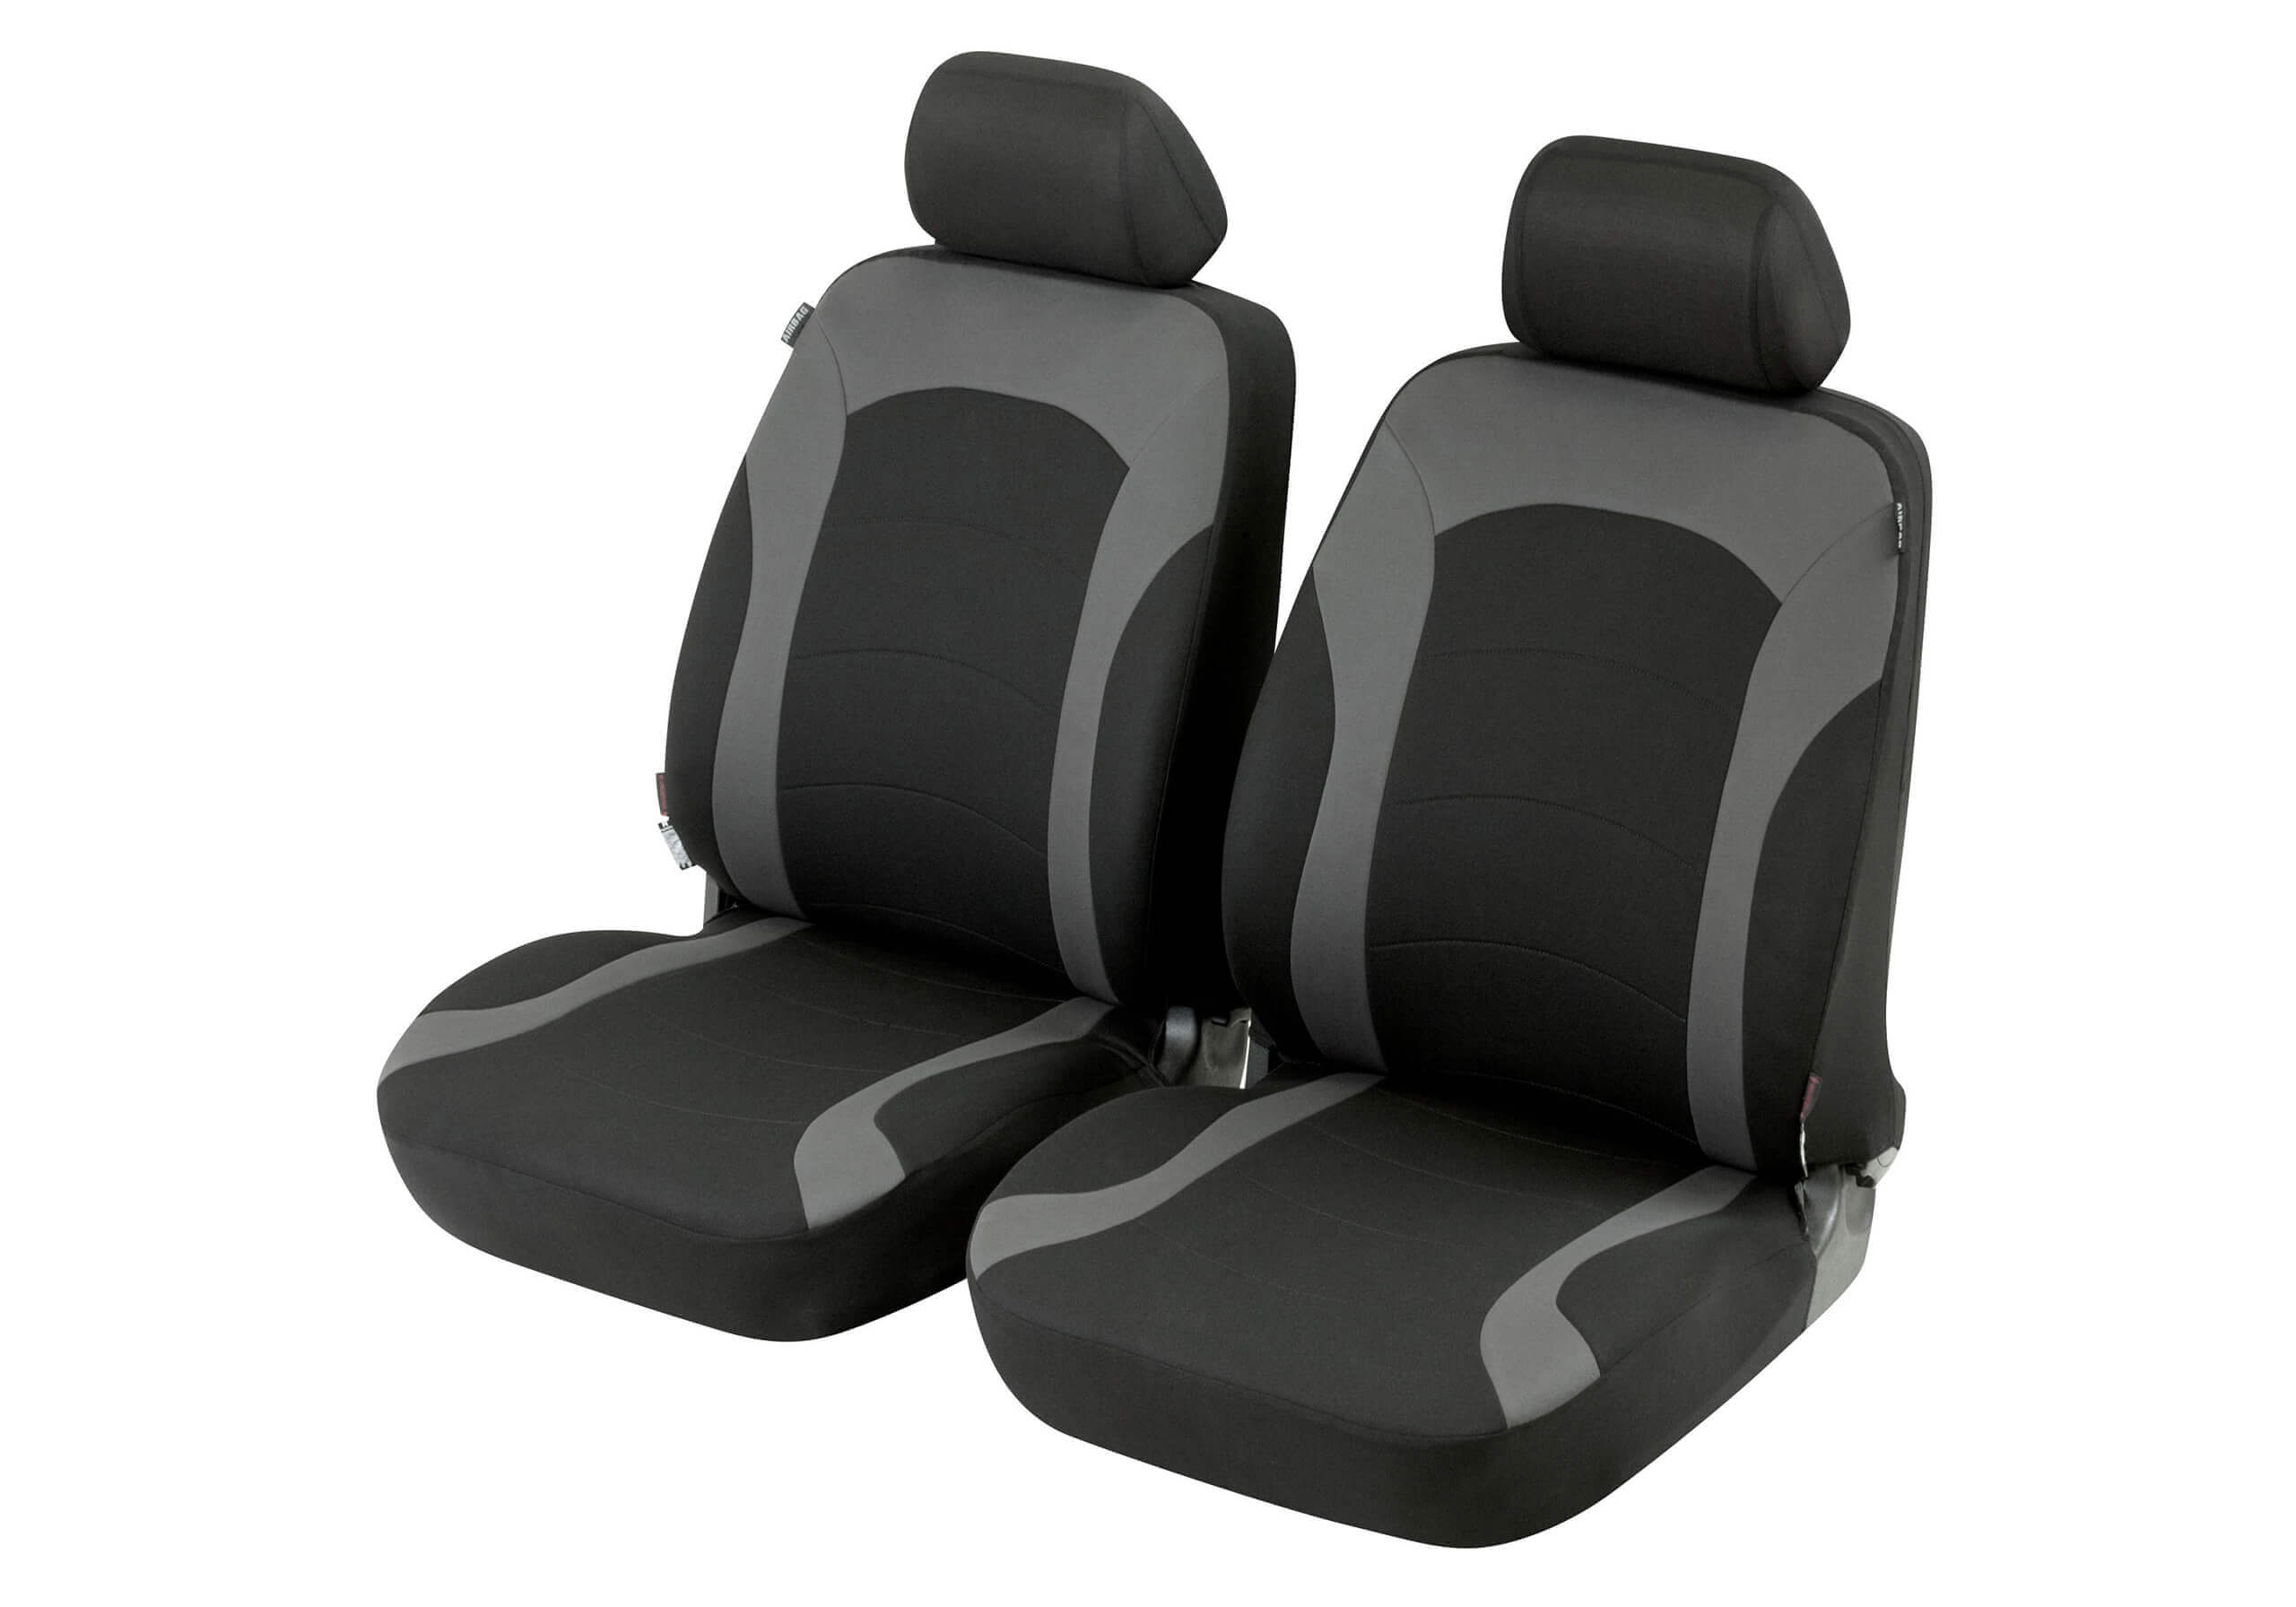 Mitsubishi Lancer four door saloon (2003 to 2008):Walser ZIPP-IT seat covers, front seats only, Inde black-grey, 11785